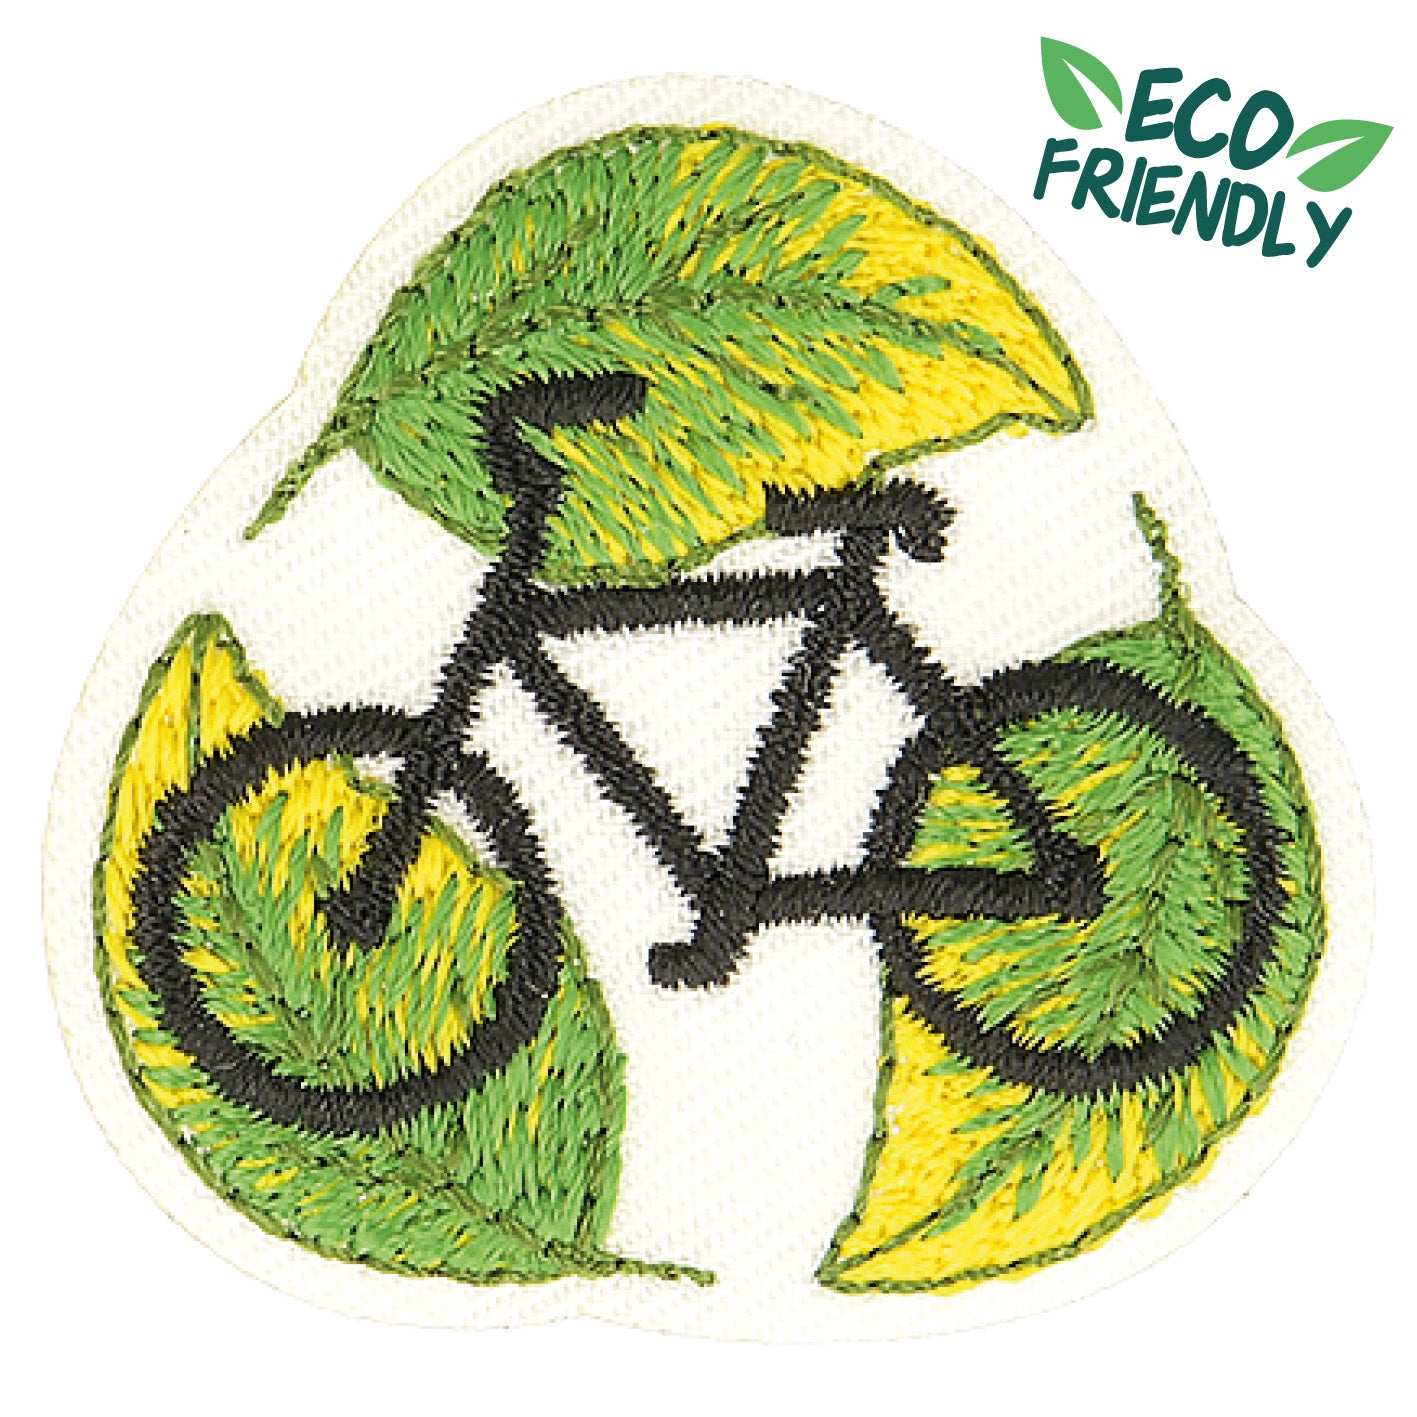 Eco friendly patches 2 varianten